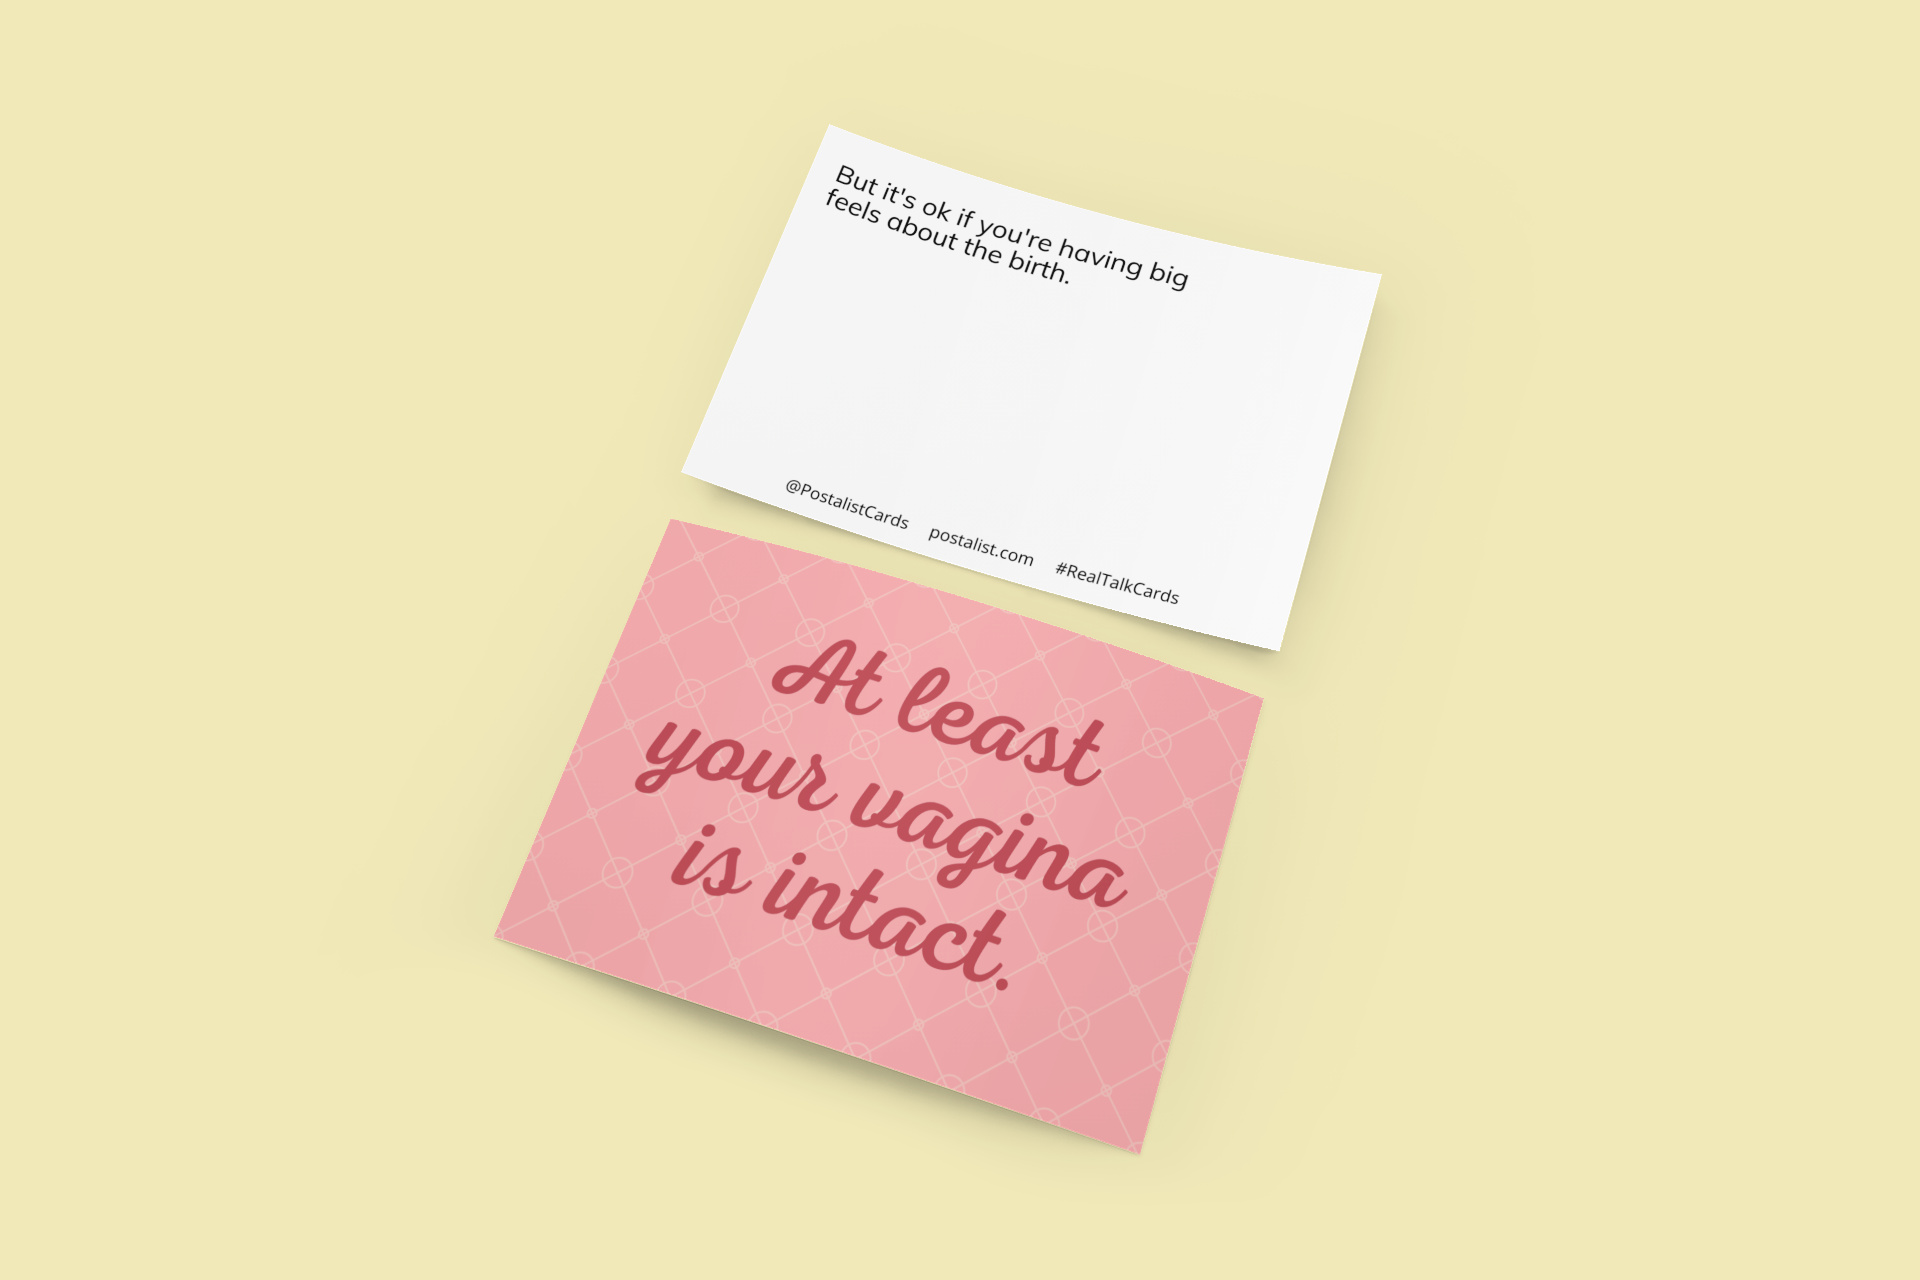 c-section cards - at least your vagina is intact